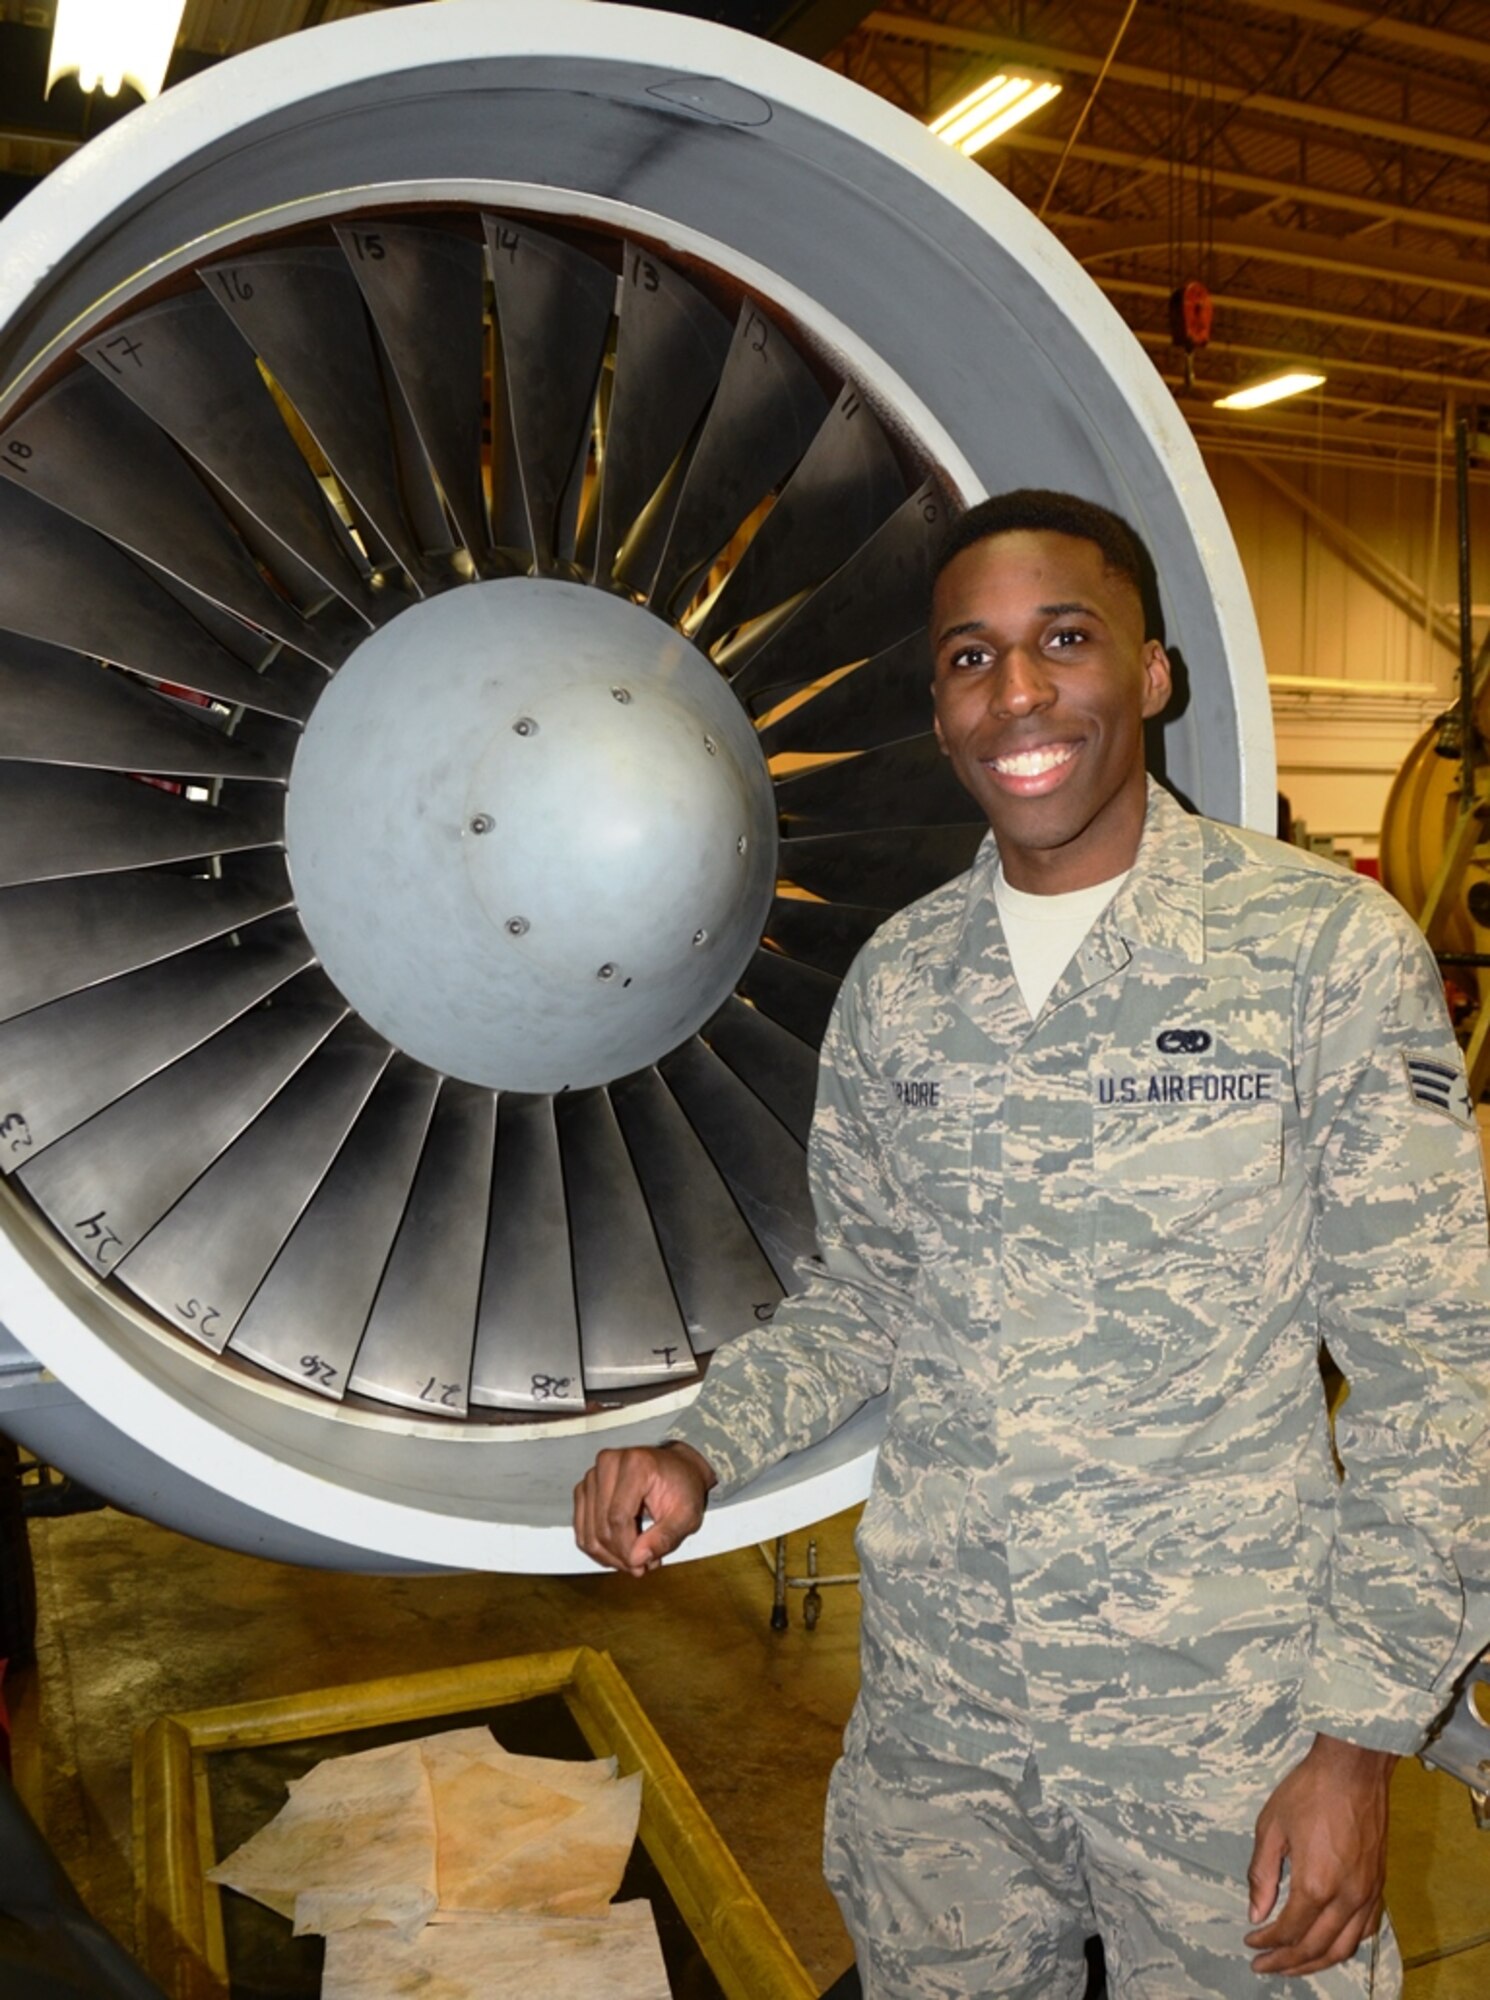 Senior Airman Jordan Traore, 175th Maintenance Squadron, stands in front of an engine for an A-10C Thunderbolt II. Traore is the June spotlight Airman in the Maryland Air National Guard. (U.S. Air National Guard photo by Tech. Sgt. David Speicher/RELEASED)